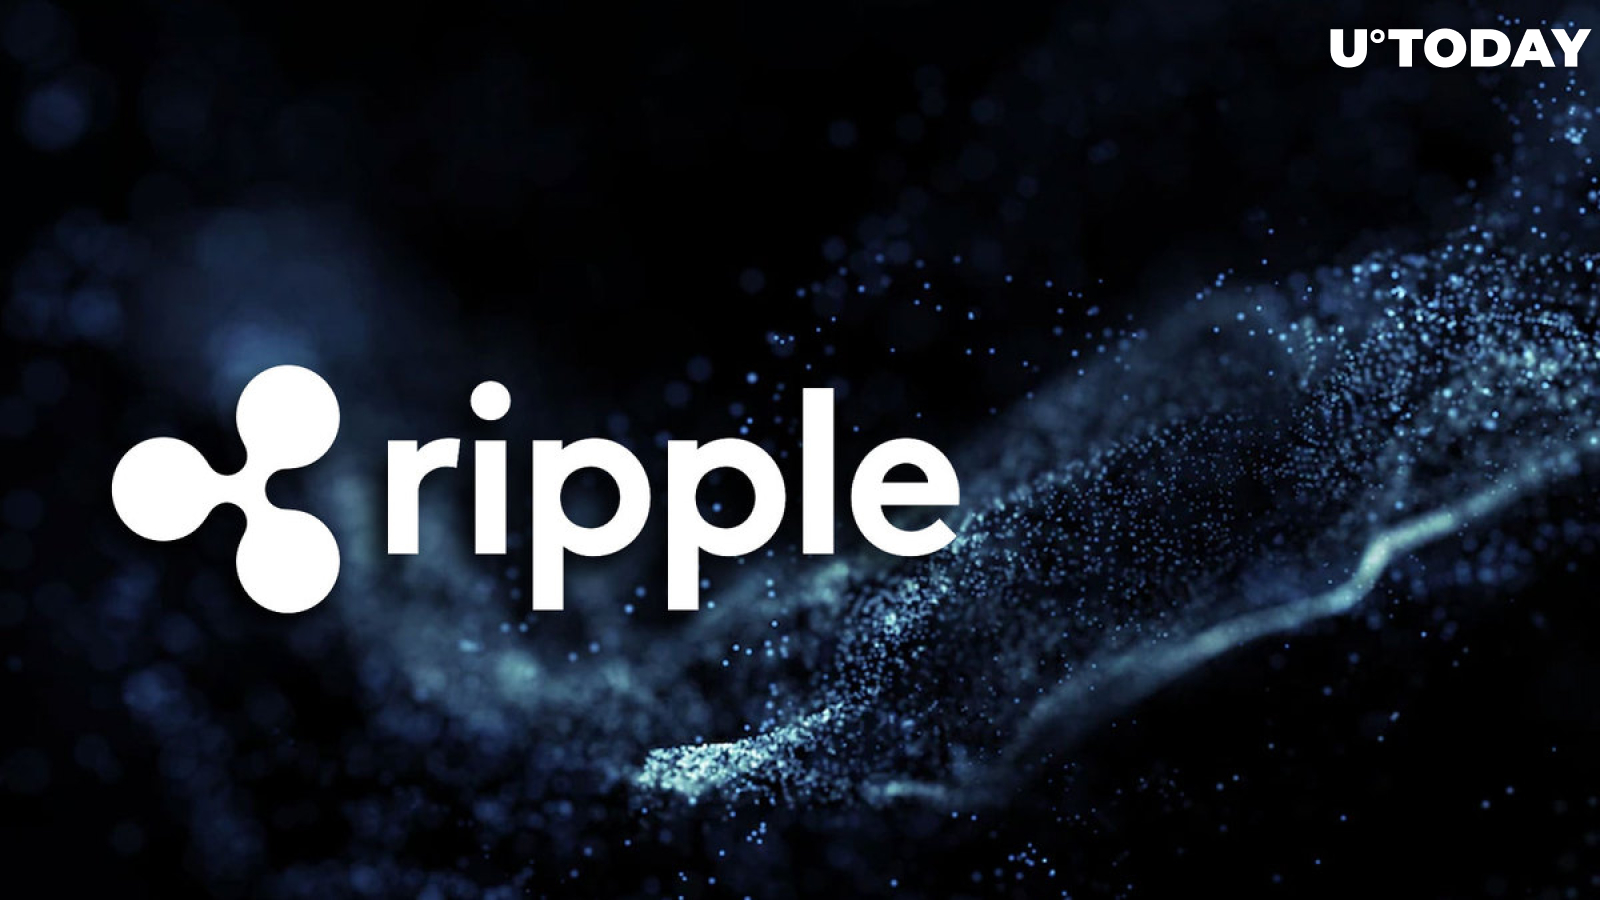 Ripple Drops Fortress Acquisition Deal